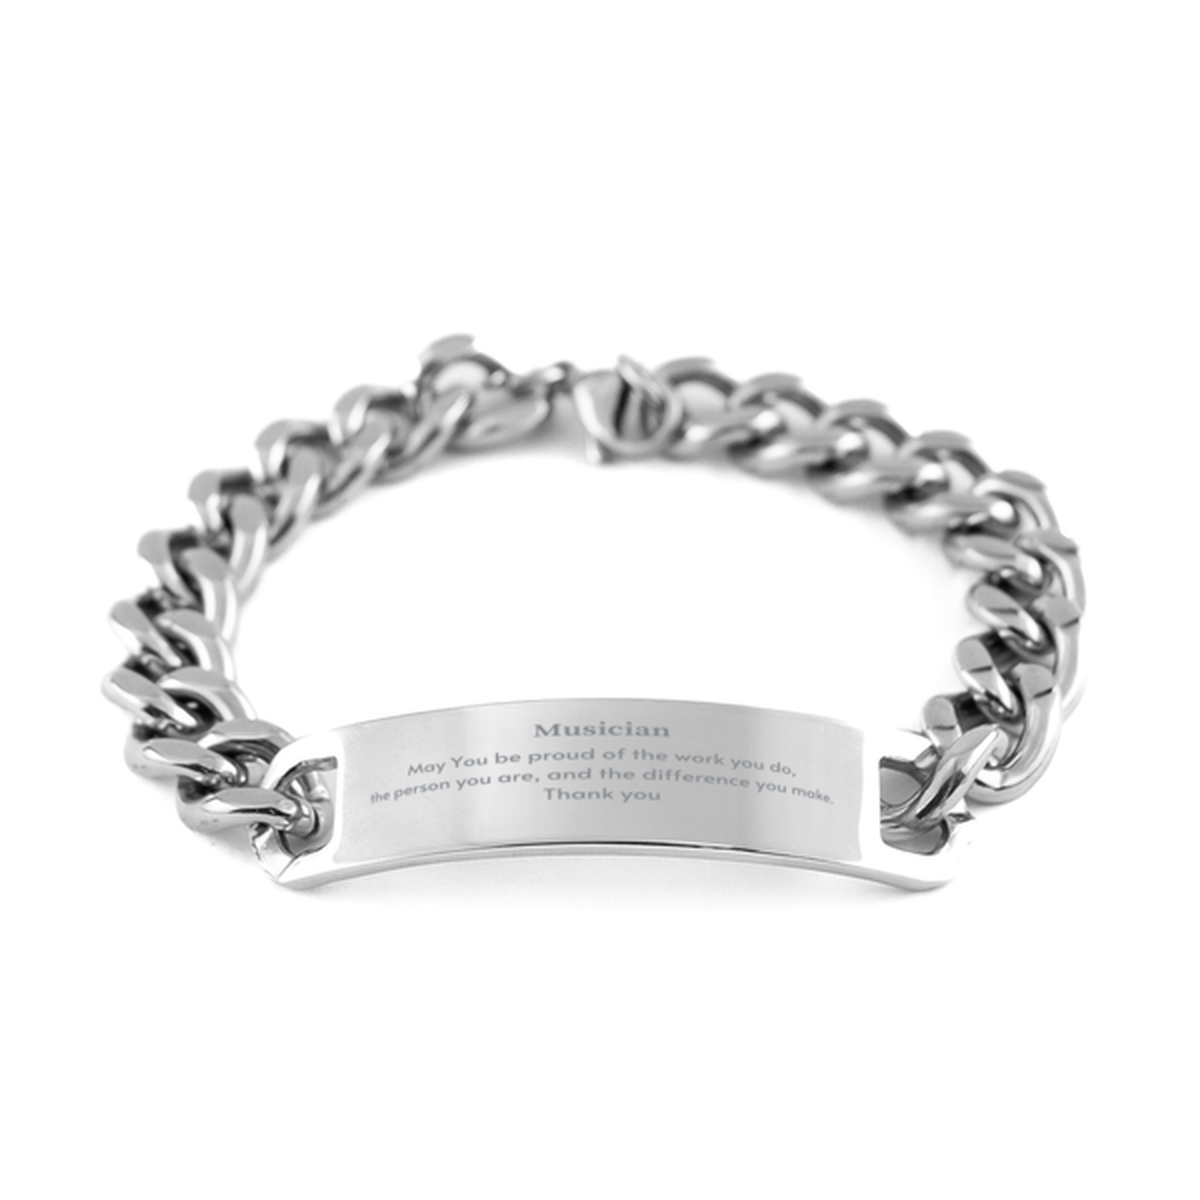 Heartwarming Cuban Chain Stainless Steel Bracelet Retirement Coworkers Gifts for Musician, Musician May You be proud of the work you do, the person you are Gifts for Boss Men Women Friends